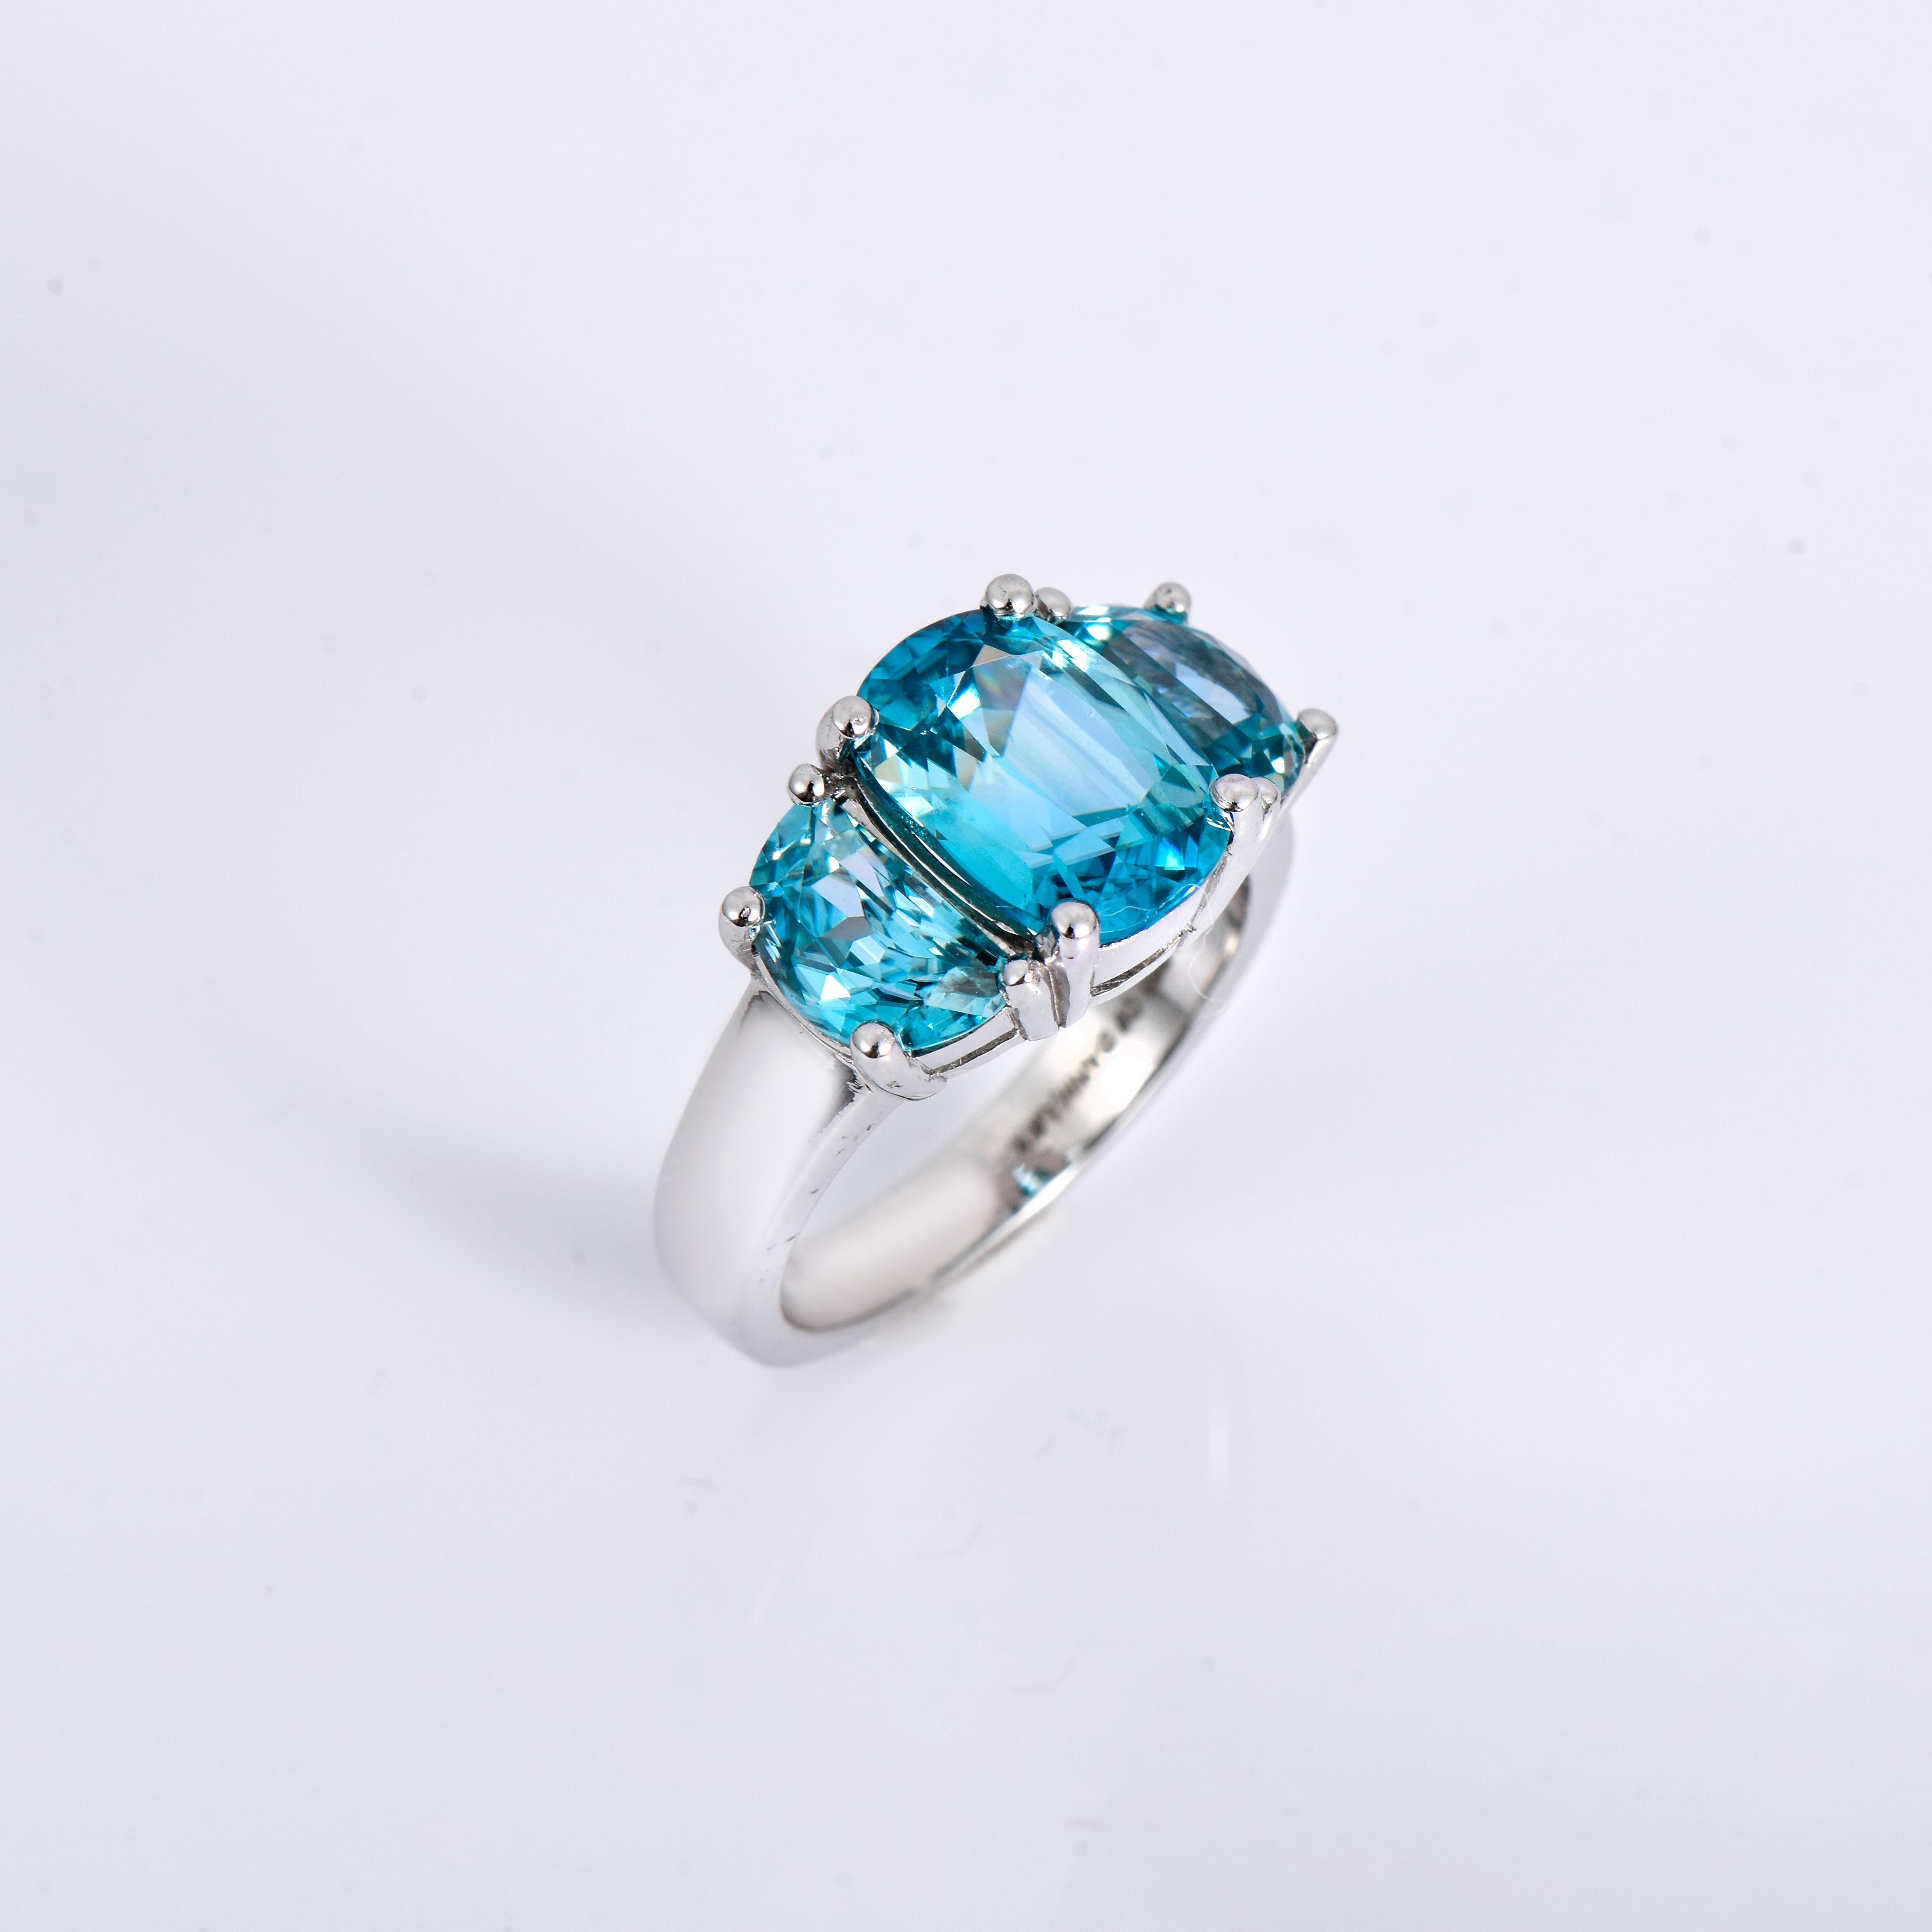 Orloff of Denmark; 925 Sterling Silver Ring set with three Natural Cambodian Blue Zircons totaling to 8.06 carats.

This 925 sterling silver ring is elegantly crafted with a central 4.68 carat cushion-cut blue zircon, complemented by two half-moon